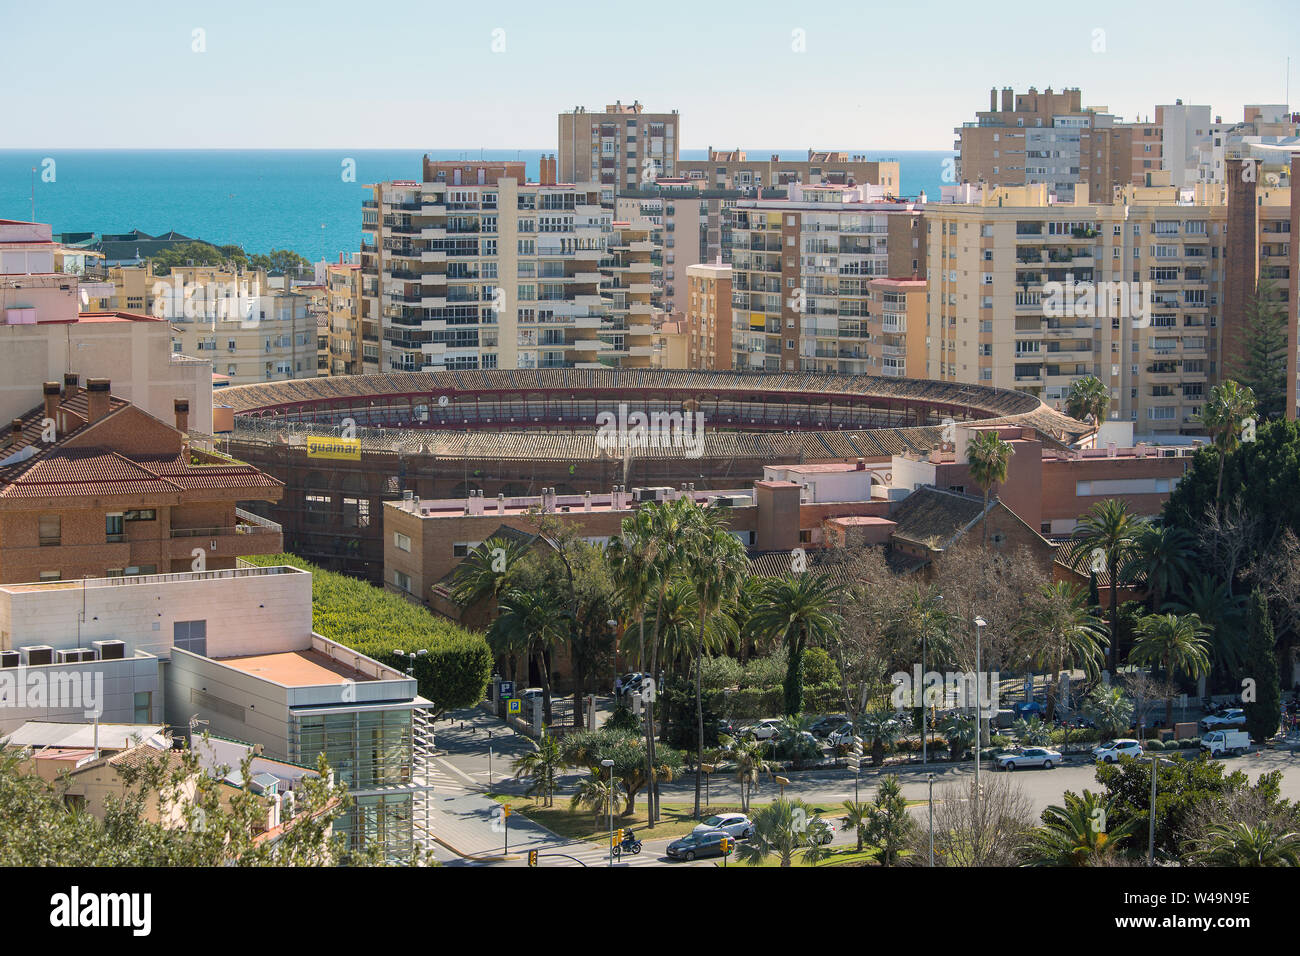 A view of the bullring in Malaga Spain Stock Photo